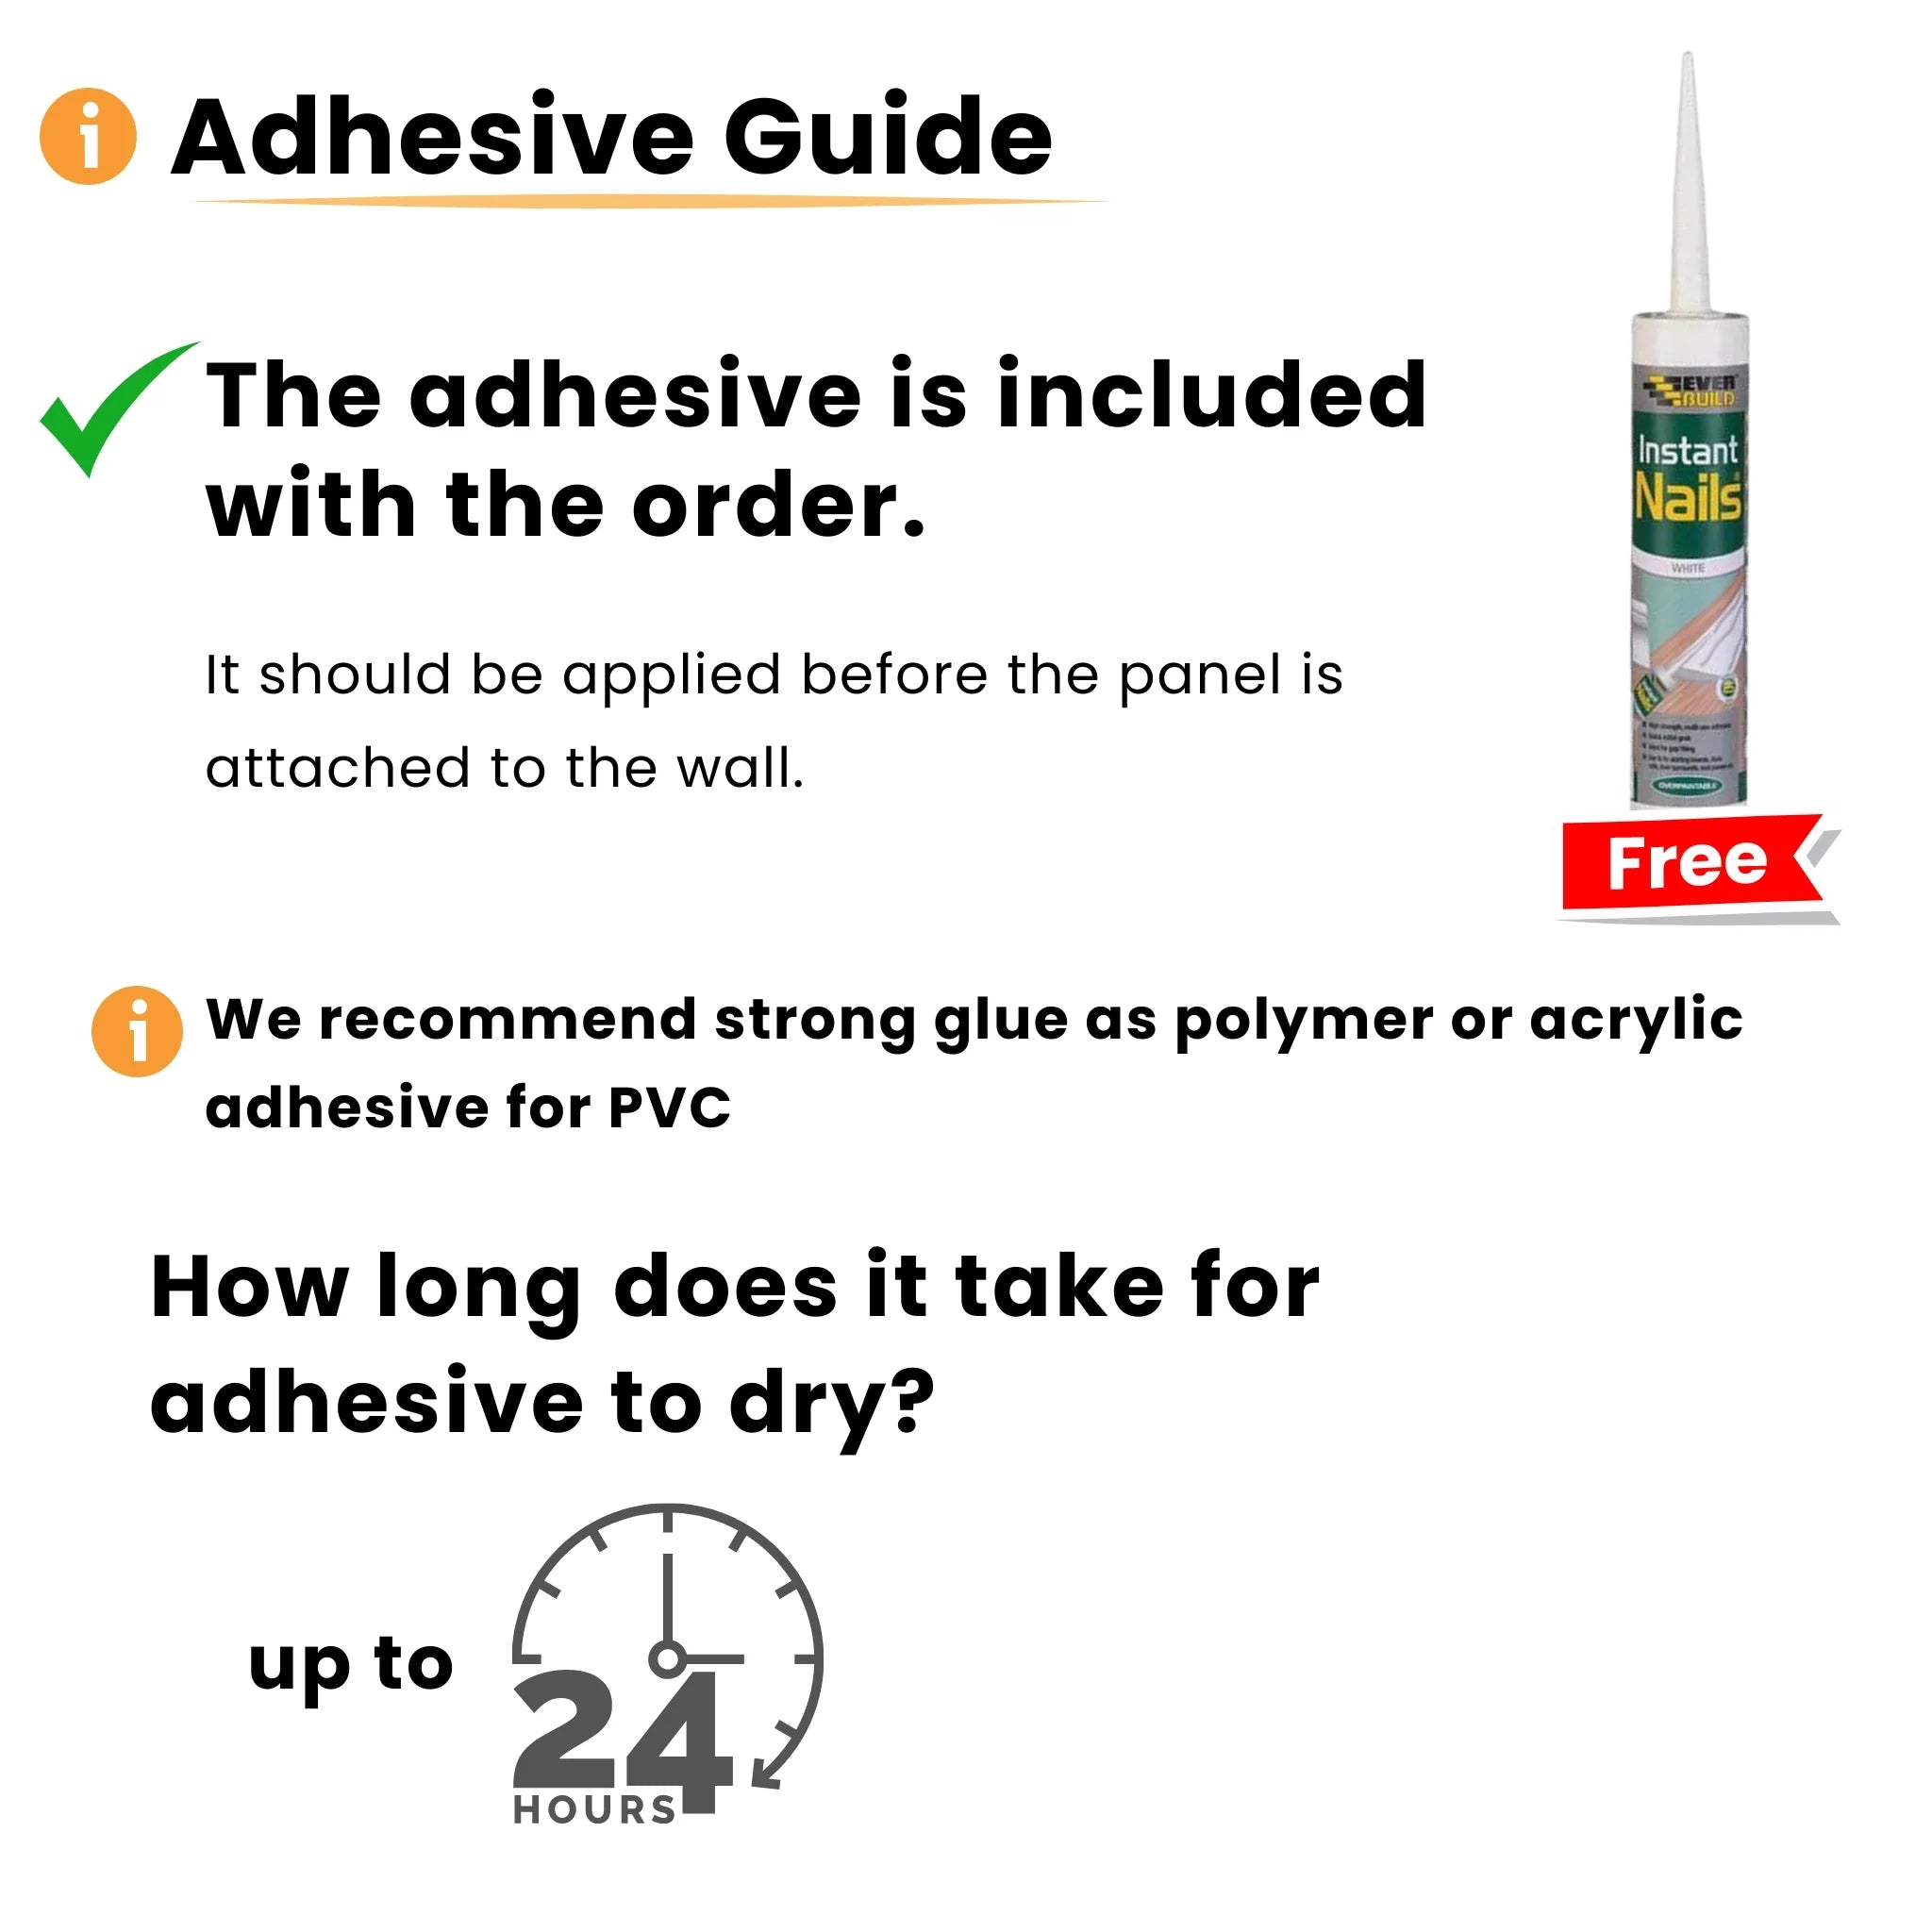 Adhesive guide for upholstered wall panels, 24-hour drying time